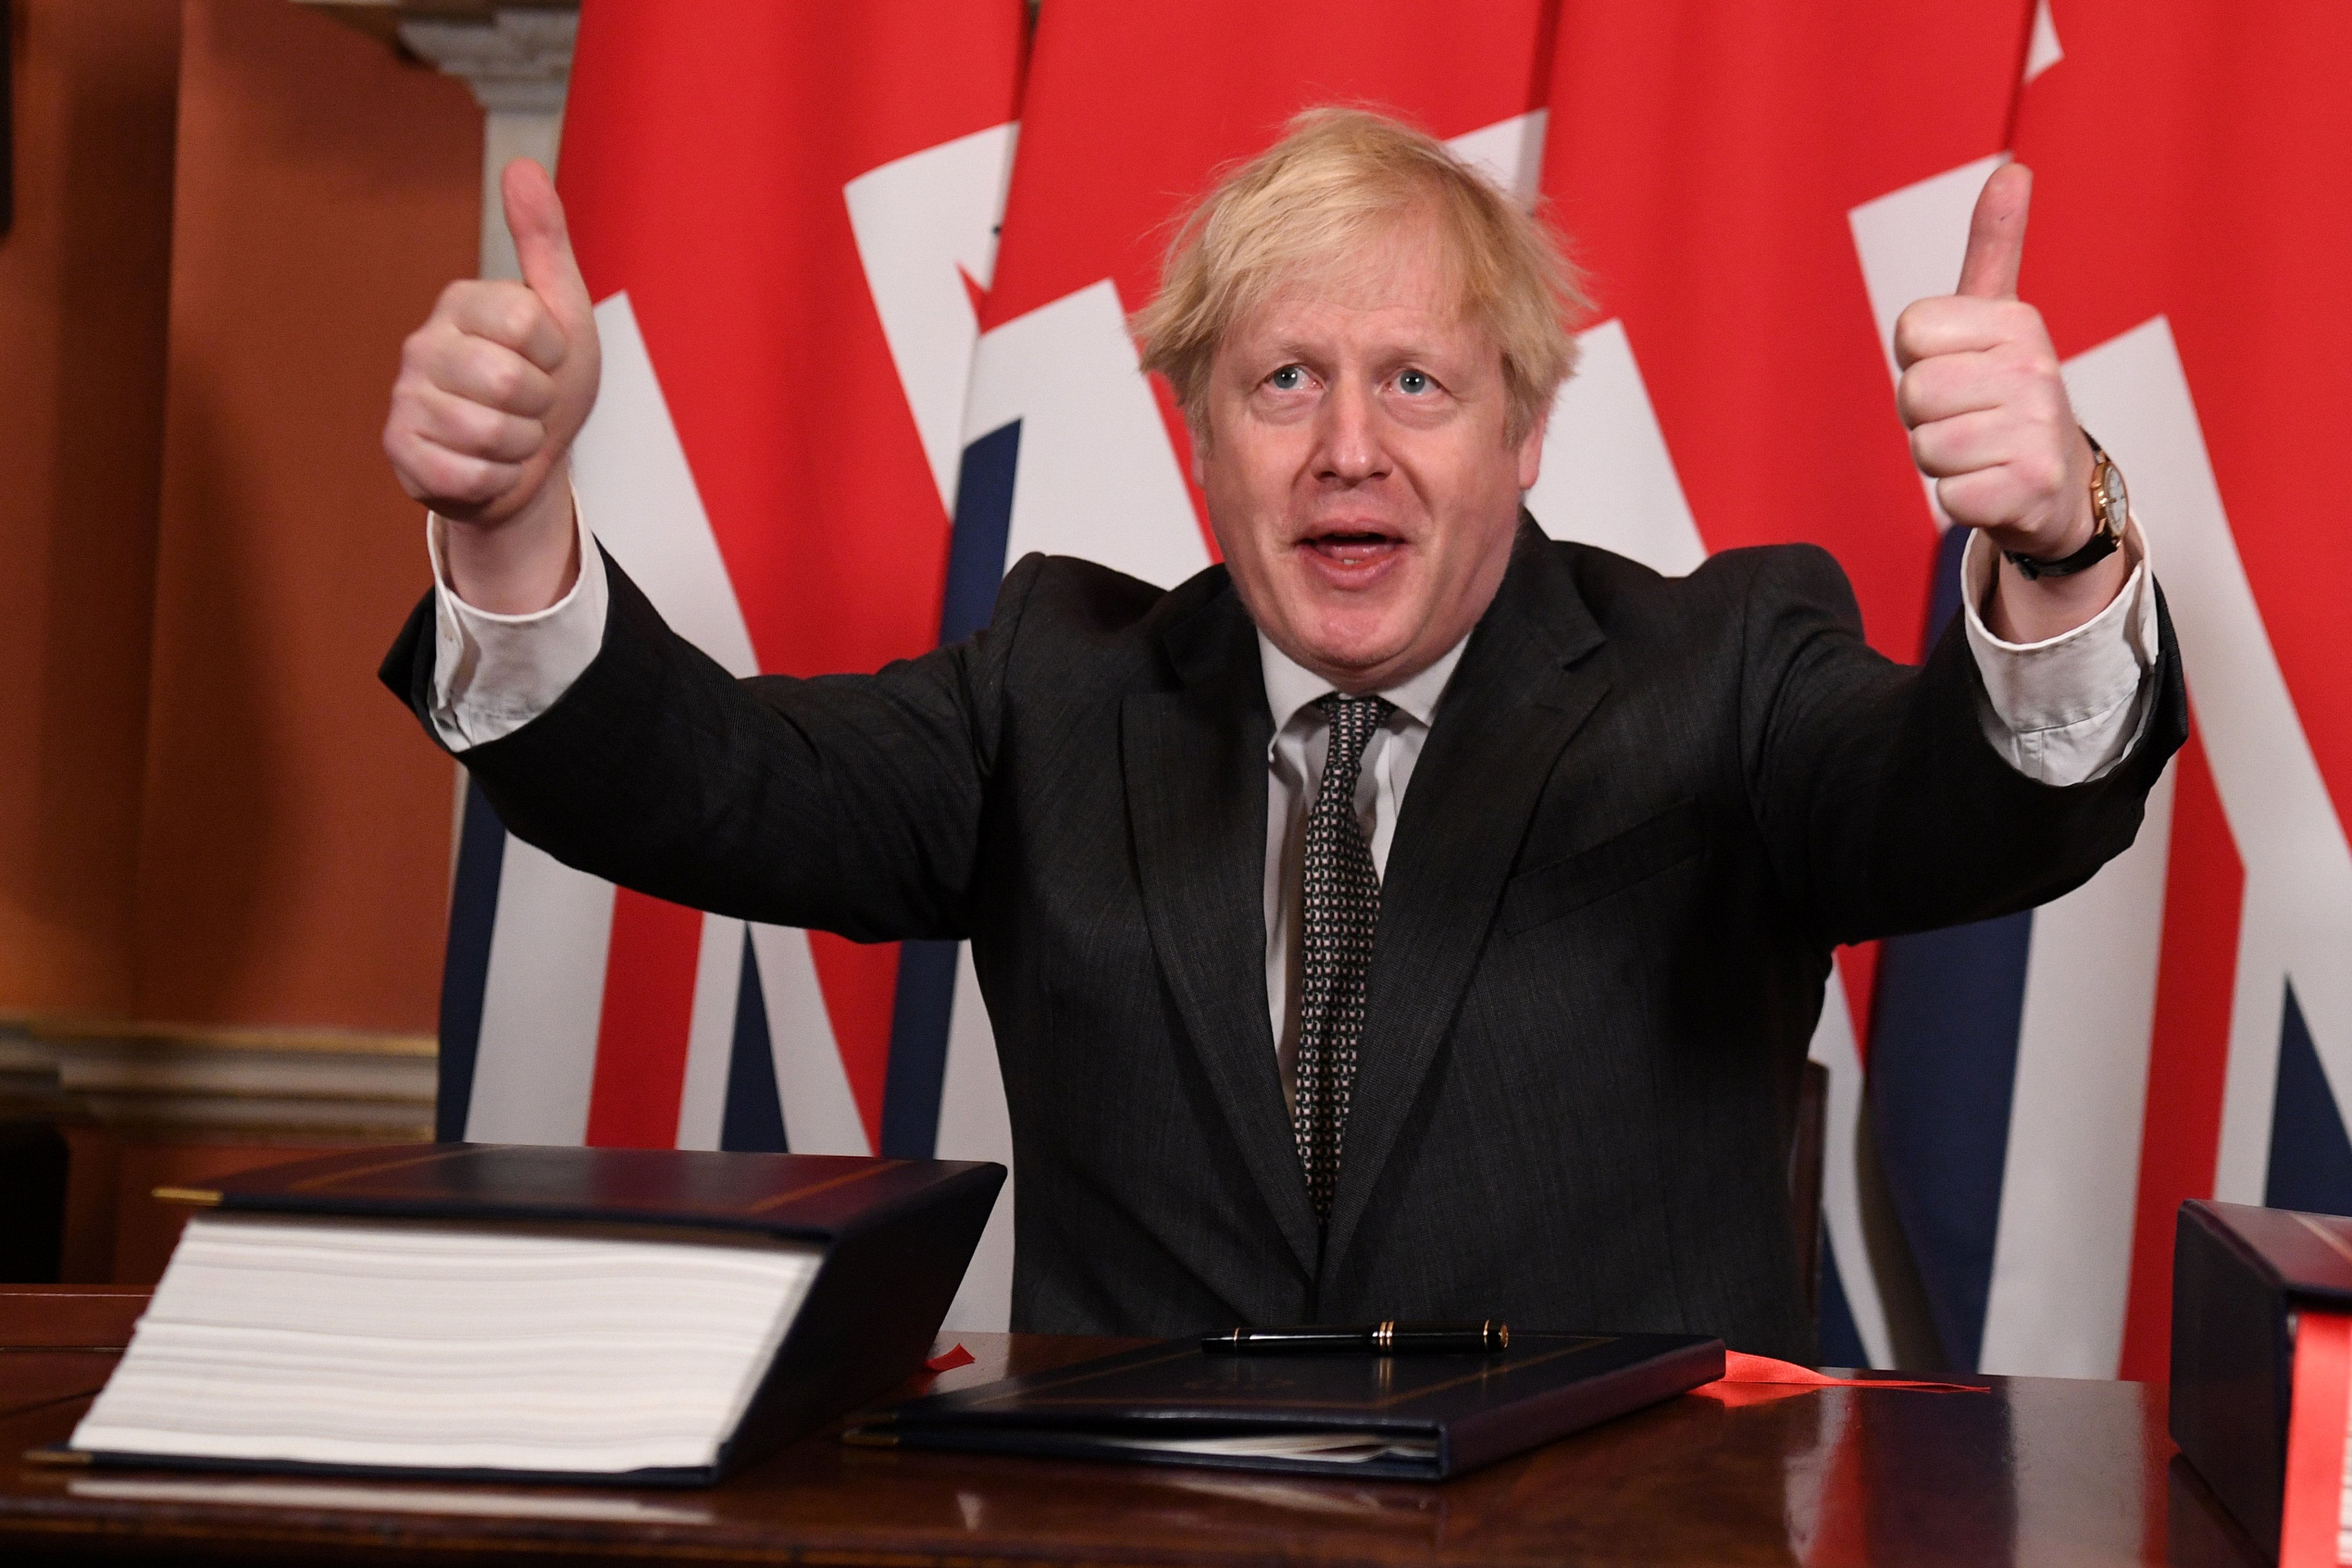 Britain’s Prime Minister Boris Johnson gives a thumbs up after signing the Brexit trade deal with the EU in London in December 2020. Photo: Reuters